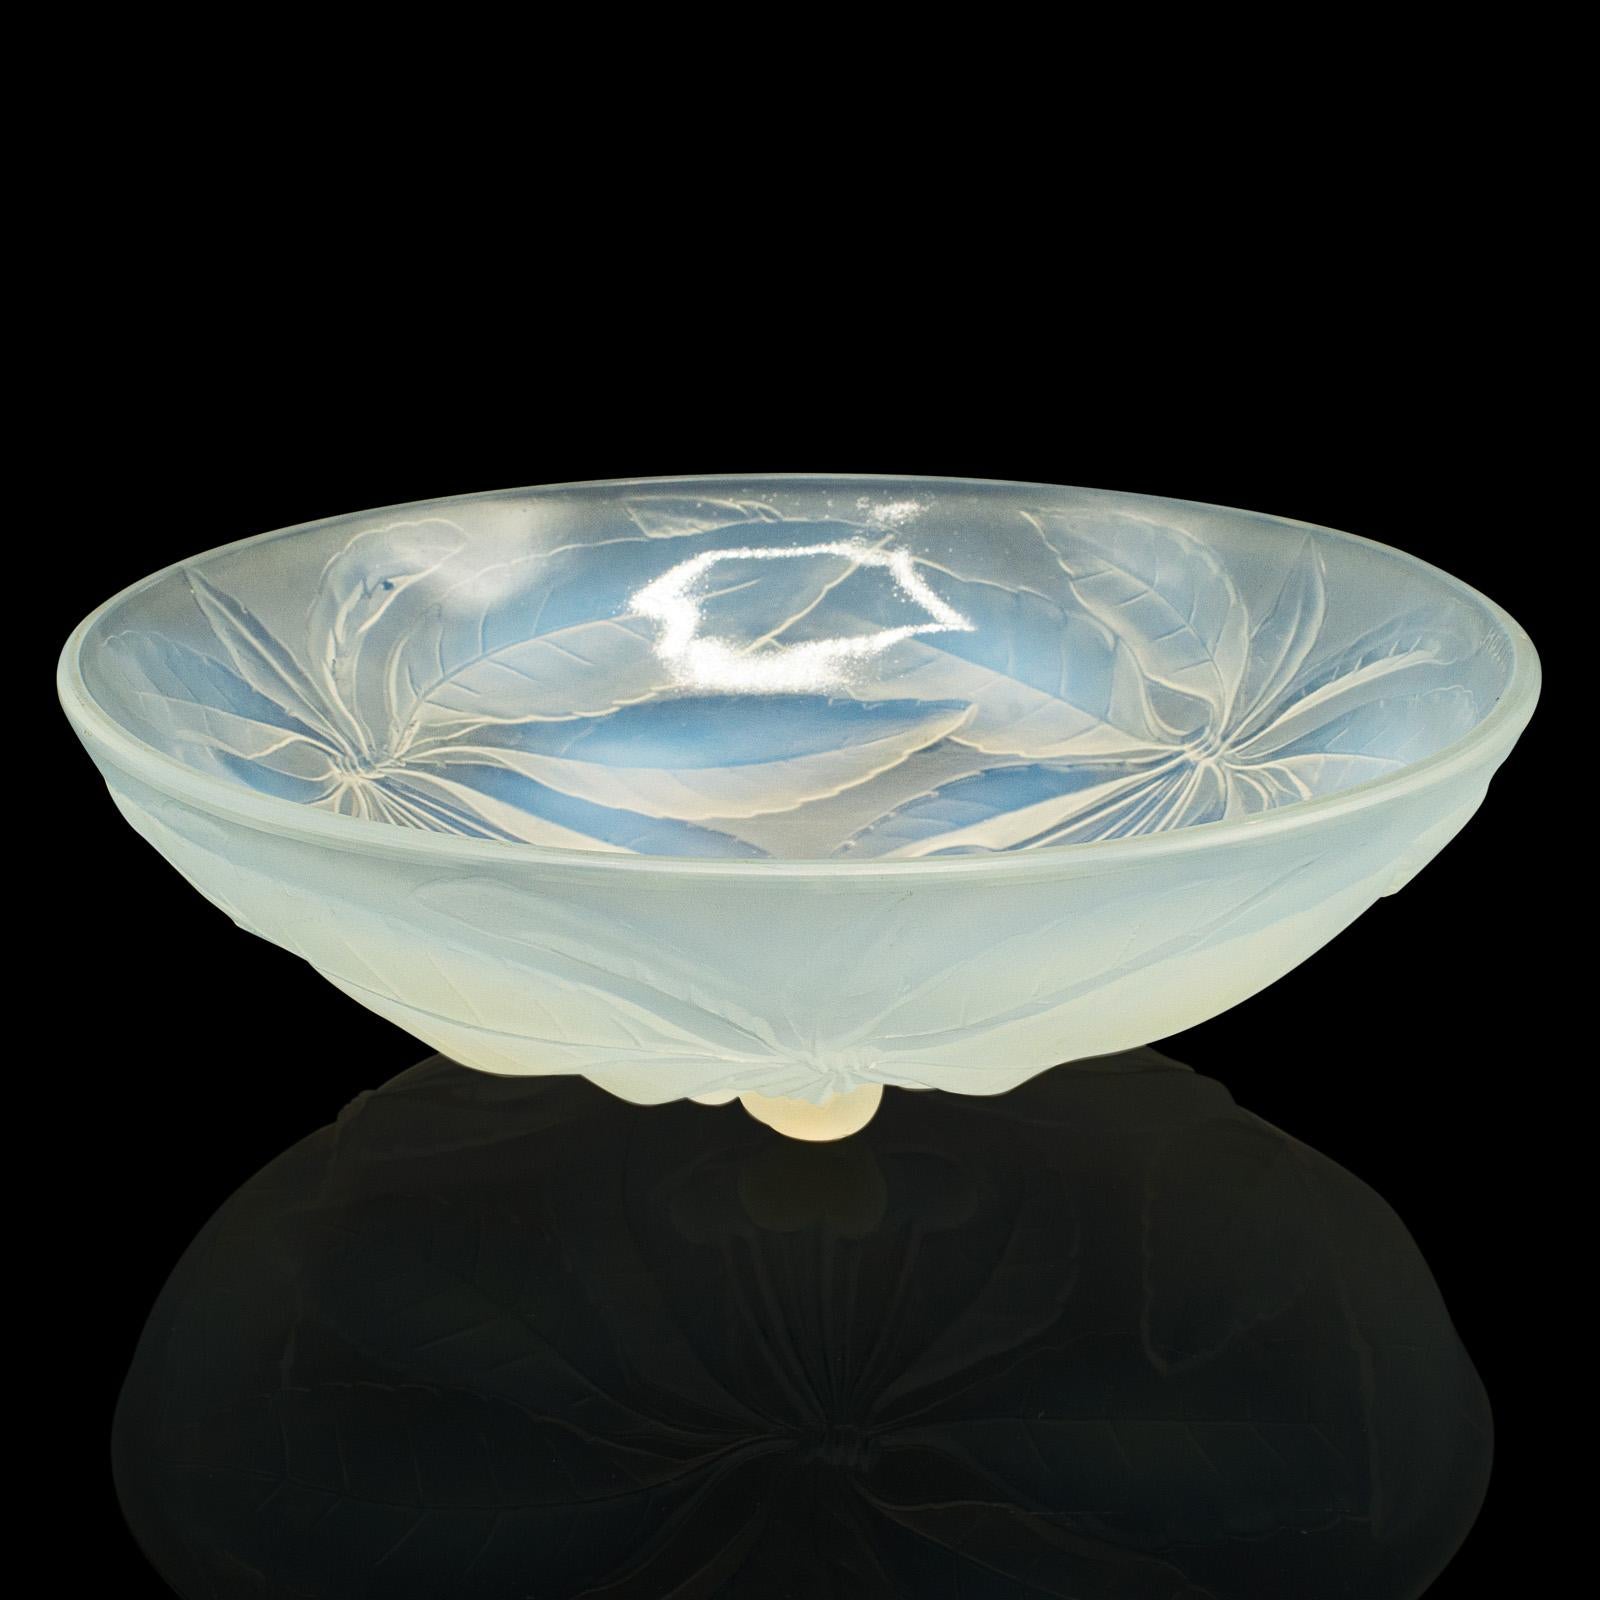 This is an antique decorative fruit bowl. A French, lead glass dish in Art Deco taste, dating to the early 20th century, circa 1920.

Striking lunar-esque hues and appealing glass forms
Displays a desirable aged patina and in good order
Lead